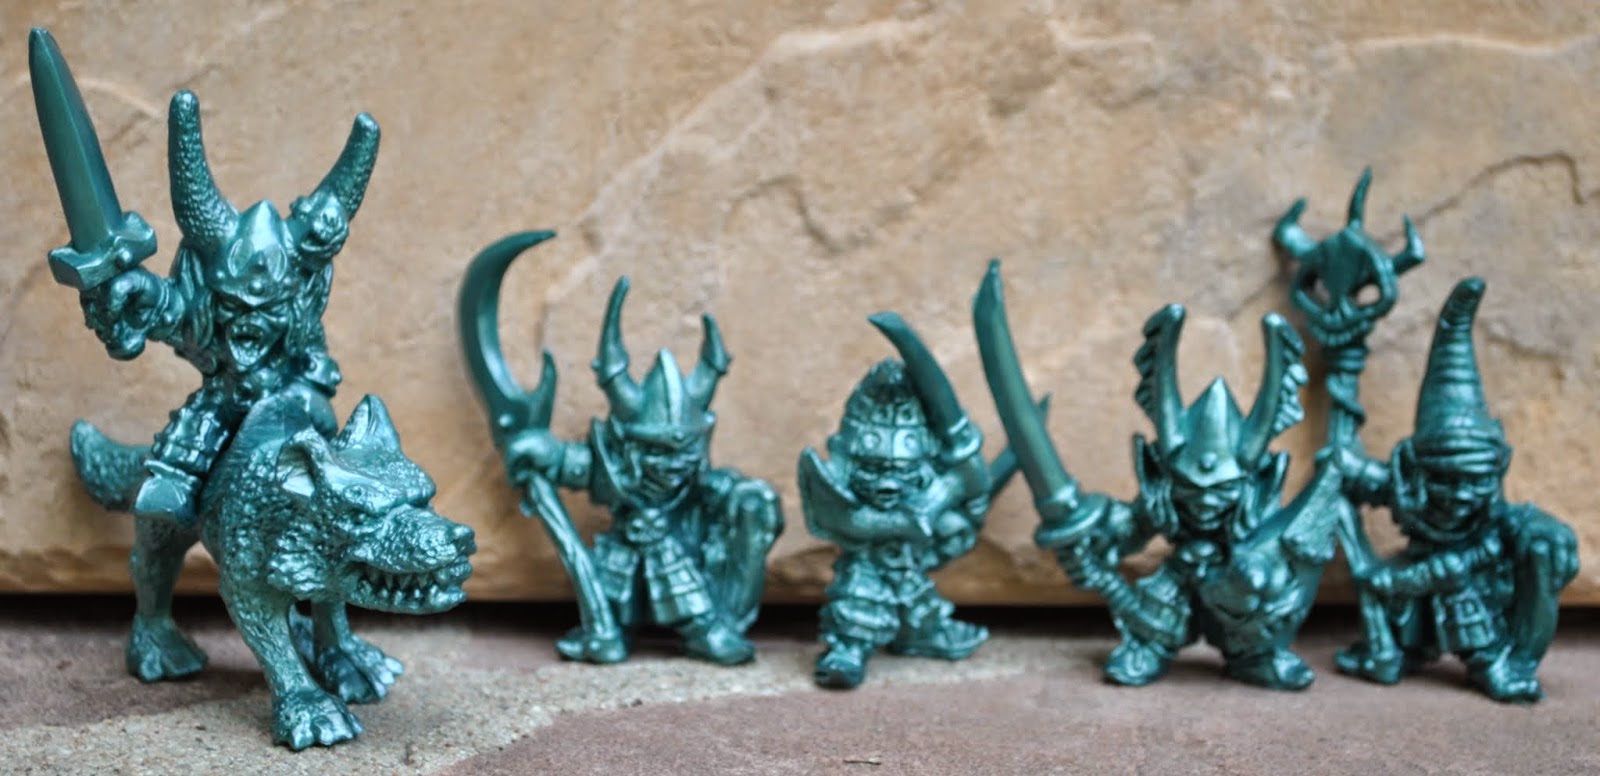 RARE Oritet Elves Fantasy Plastic Toy Soldiers from Russia 54mm 